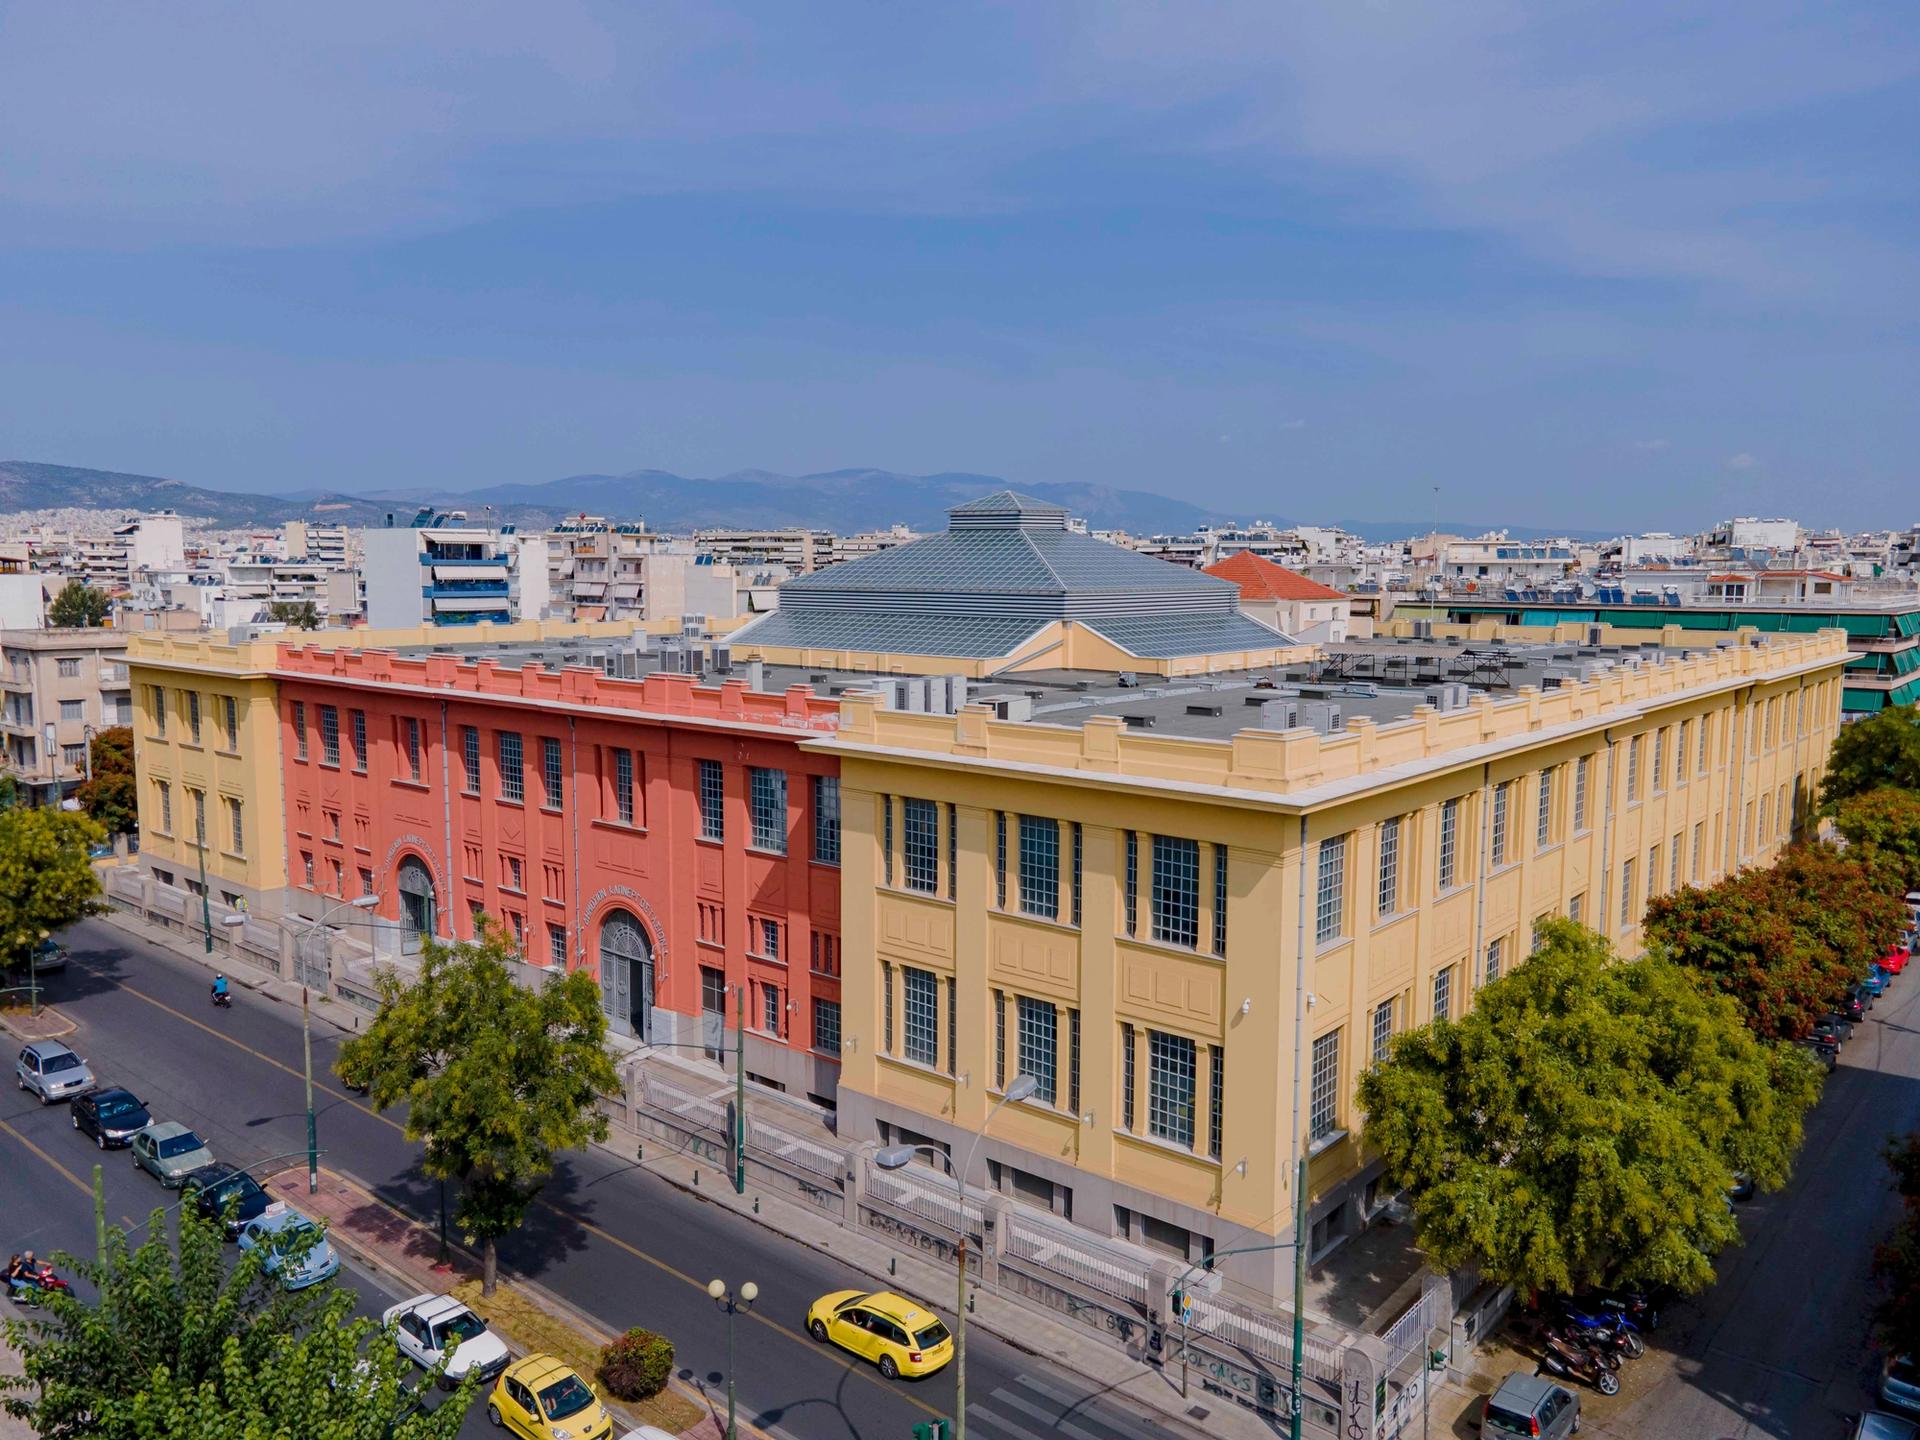 The former Public Tobacco Factory, which now houses the Hellenic Parliament Library and Printing House Photo: © Giorgos Charisis; courtesy of the Hellenic Parliament and Neon